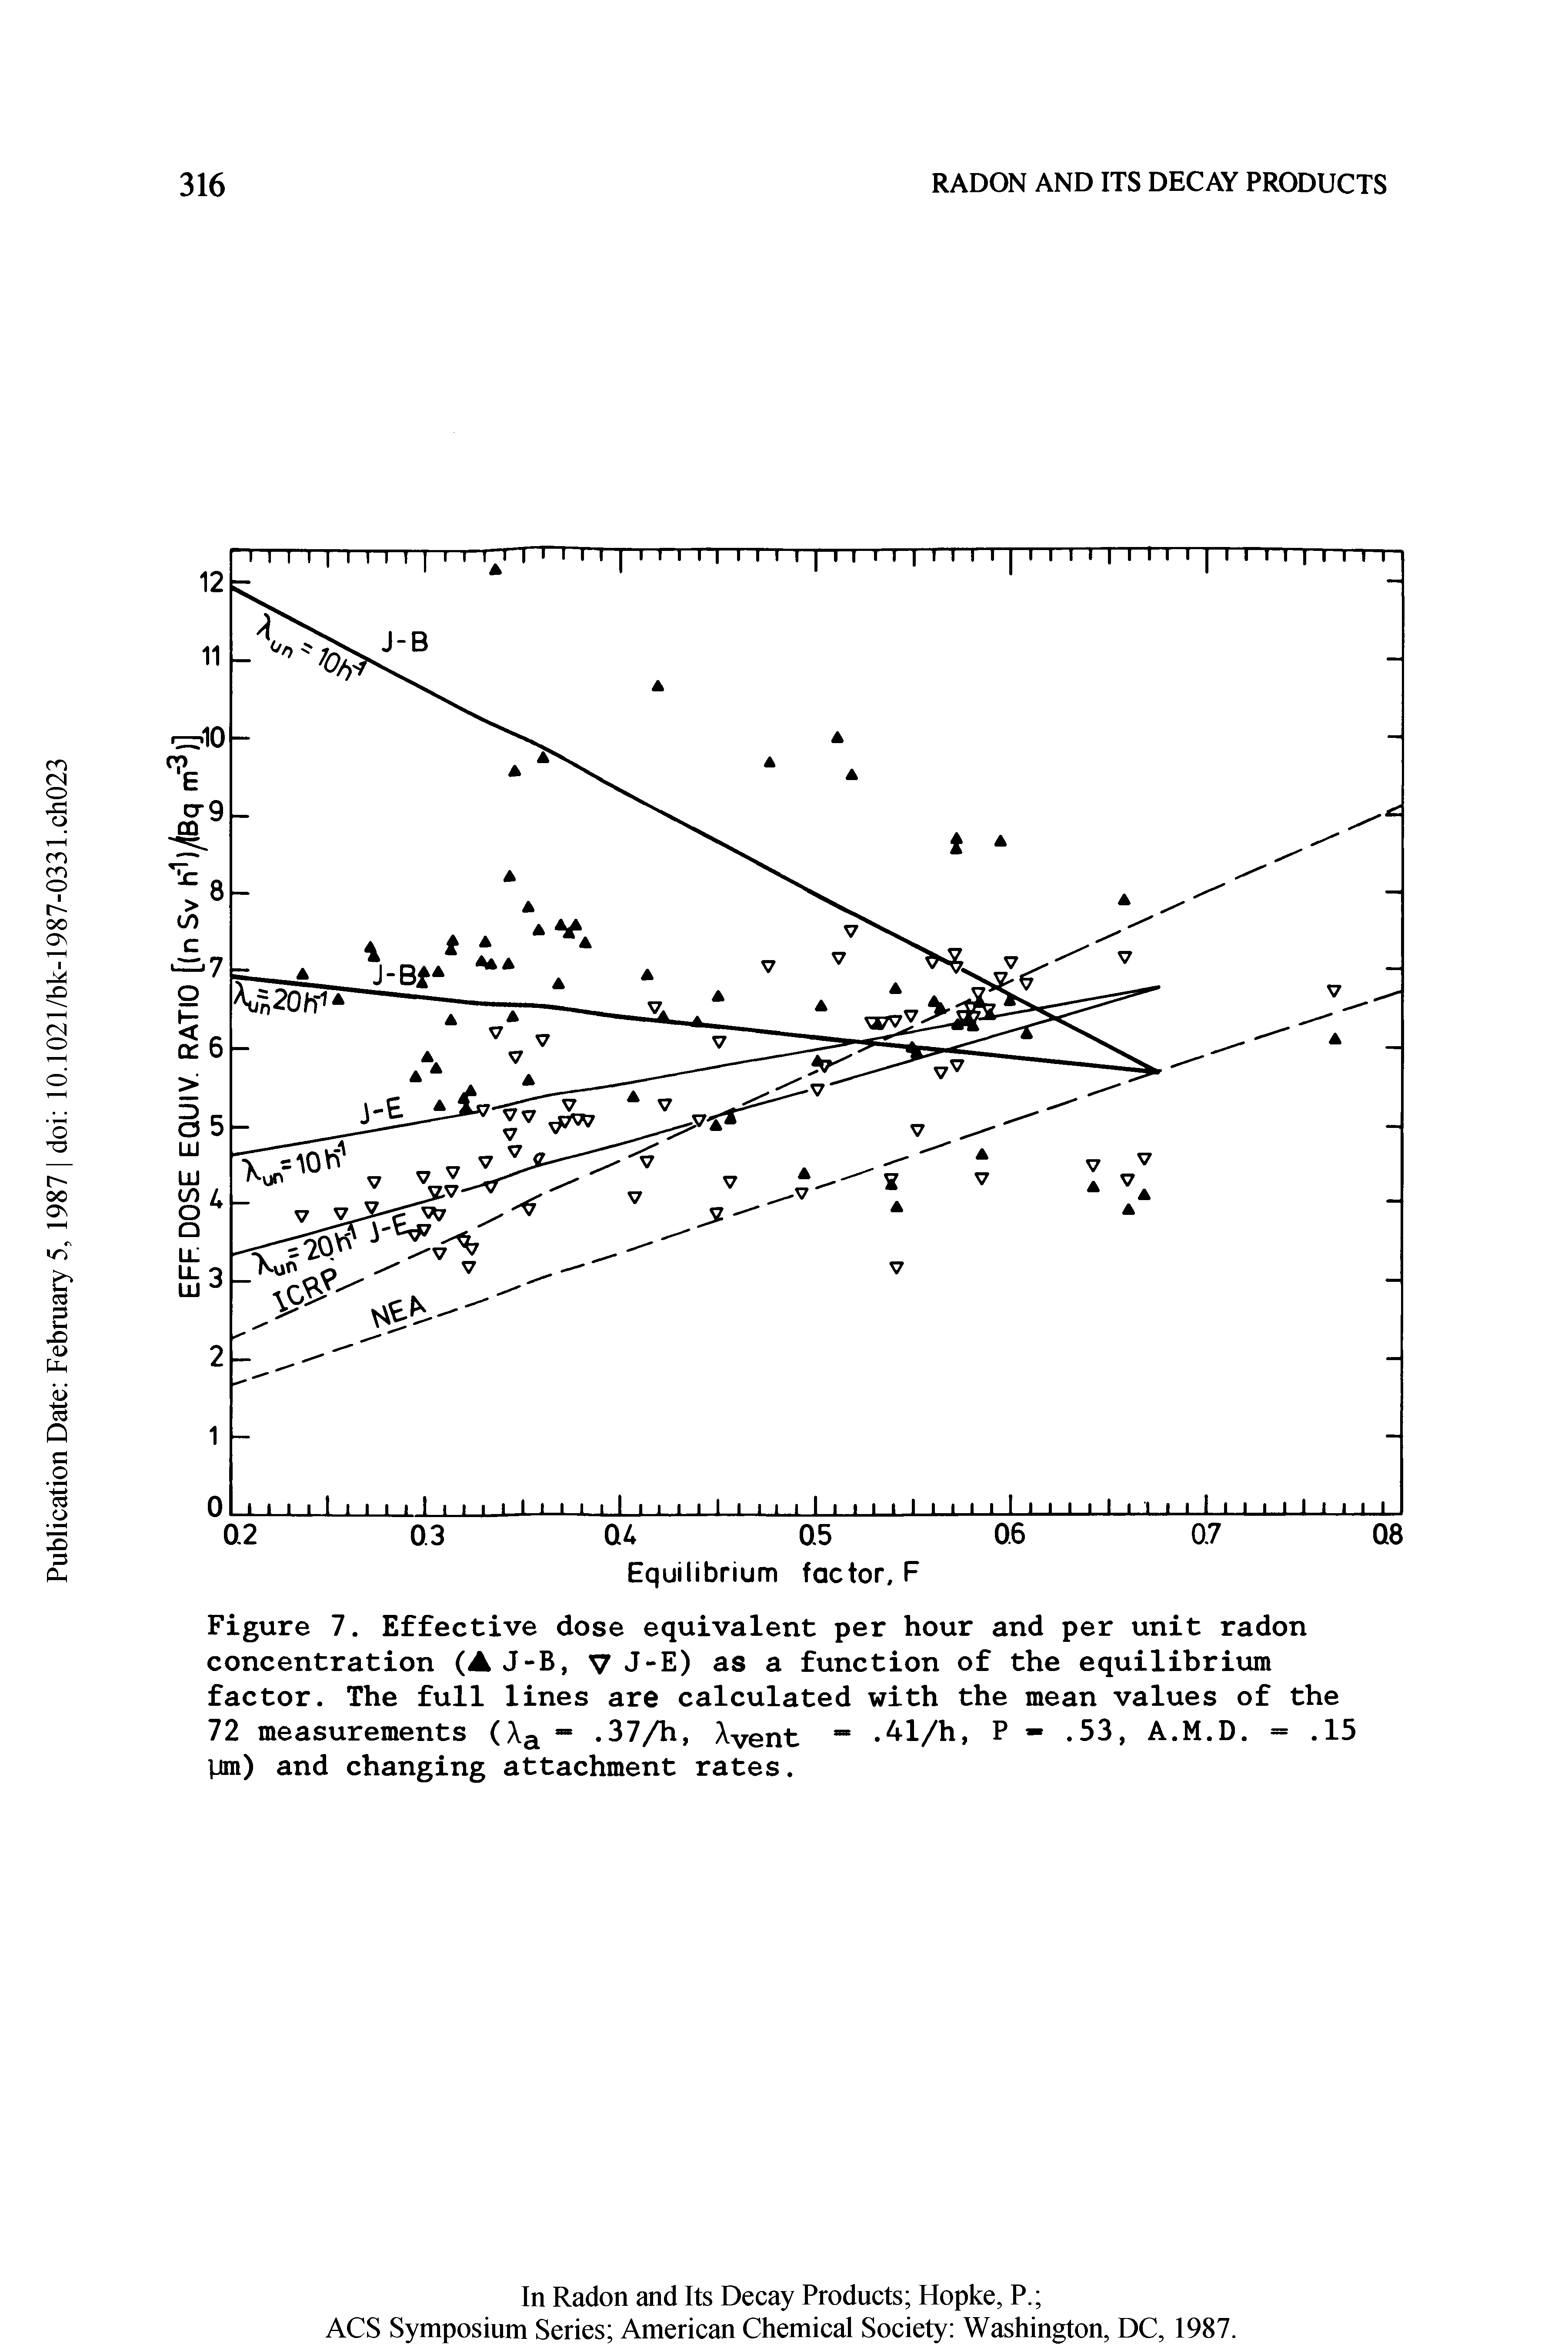 Figure 7. Effective dose equivalent per hour and per unit radon concentration (AJ-B, 7 J-E) as a function of the equilibrium factor. The full lines are calculated with the mean values of the 72 measurements (Xa -. 37/h, XVent . 41/h, P -. 53, A.M.D. —. 15 lJm) and changing attachment rates.